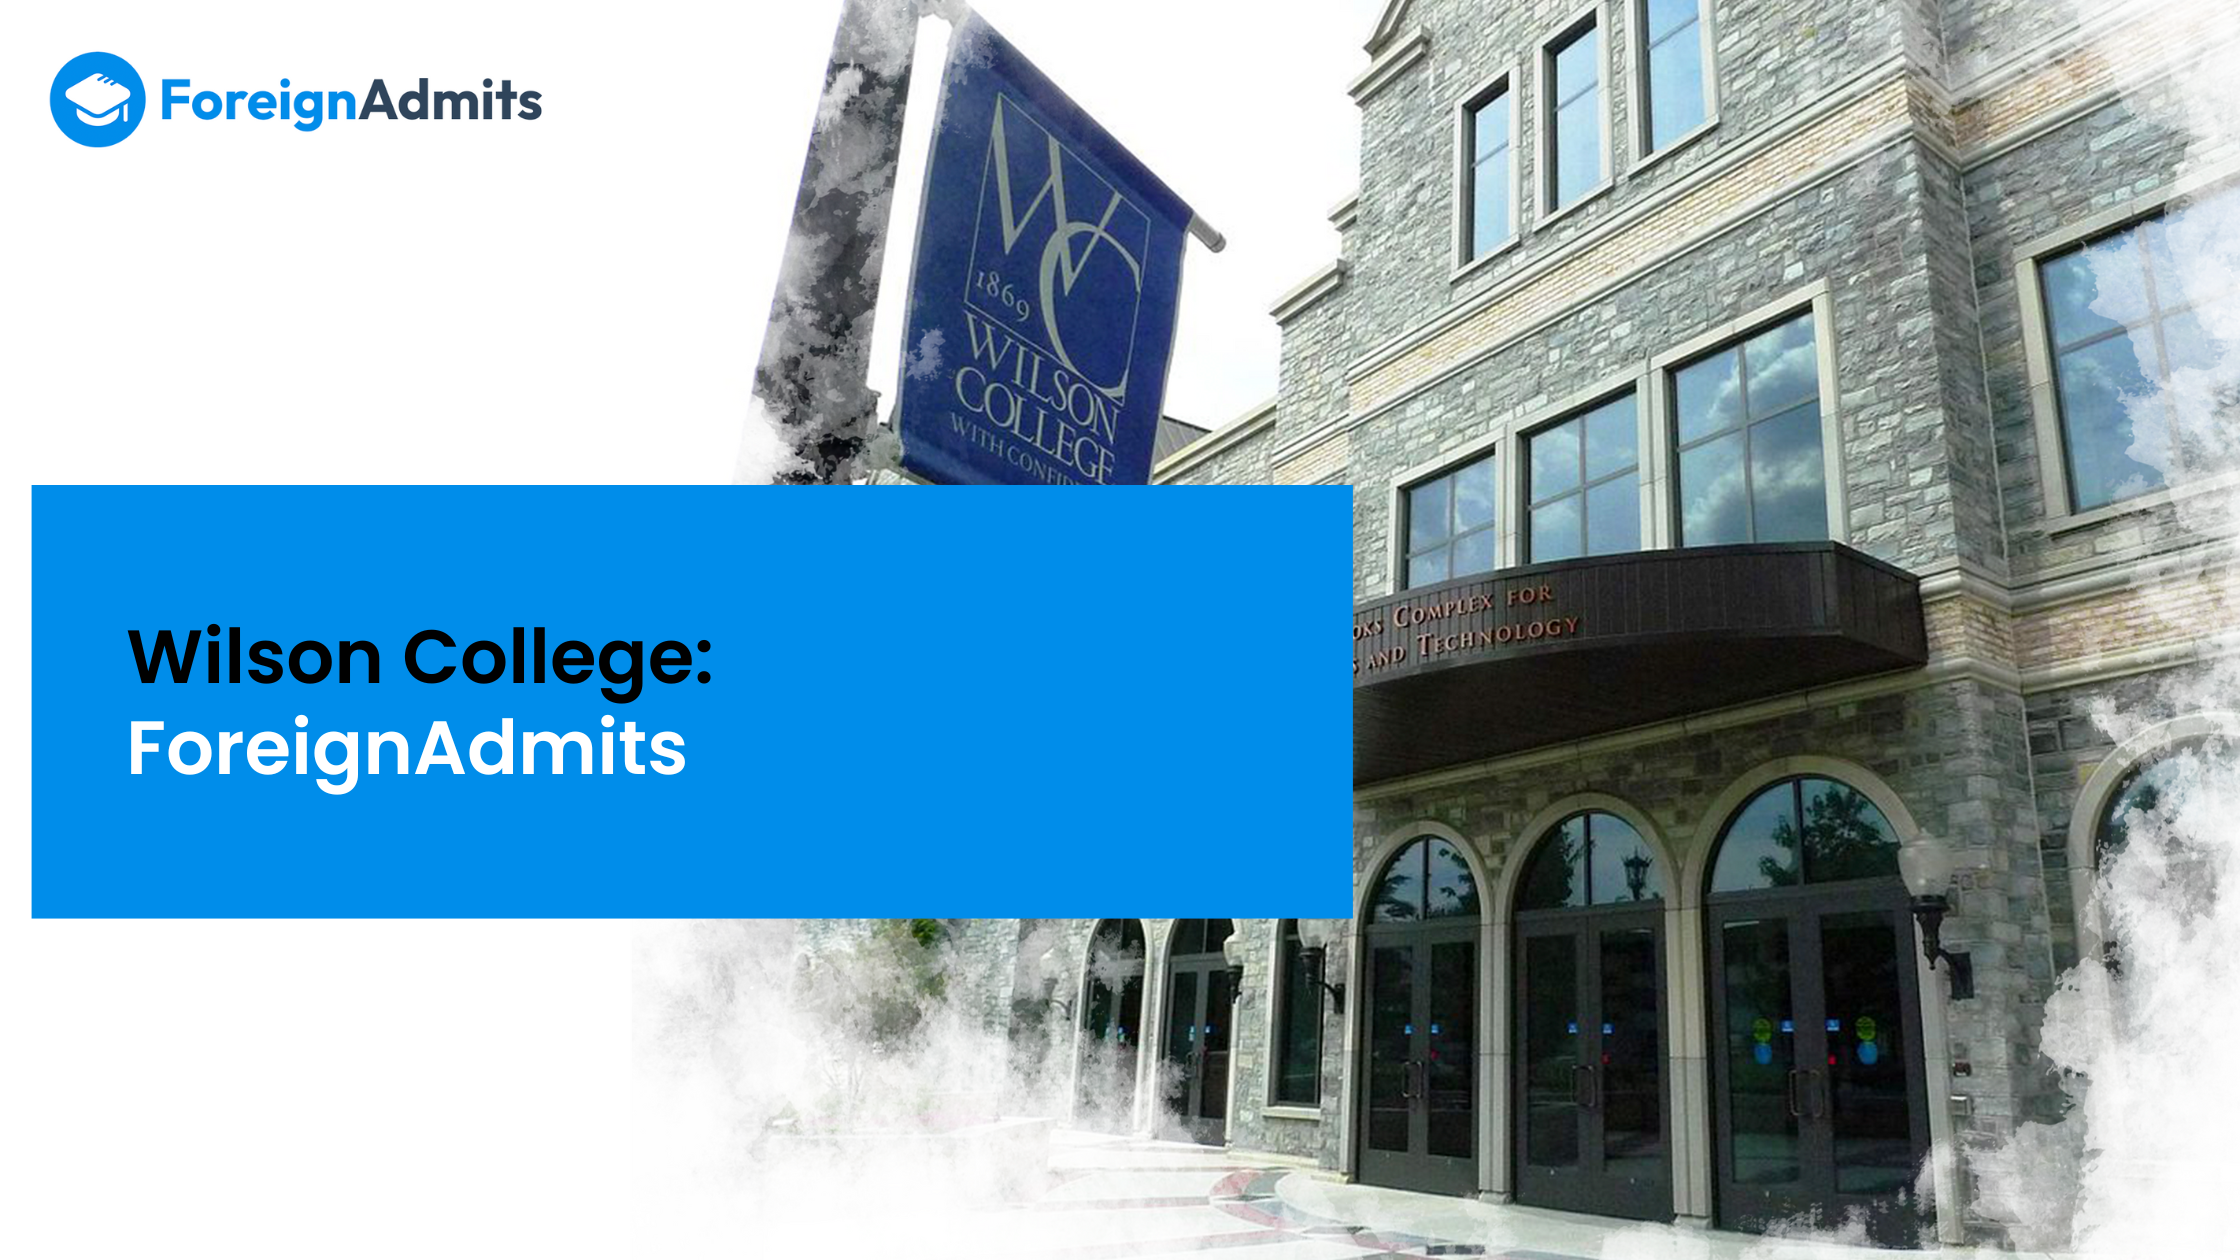 Wilson College: An Affordable Liberal Arts College – ForeignAdmits